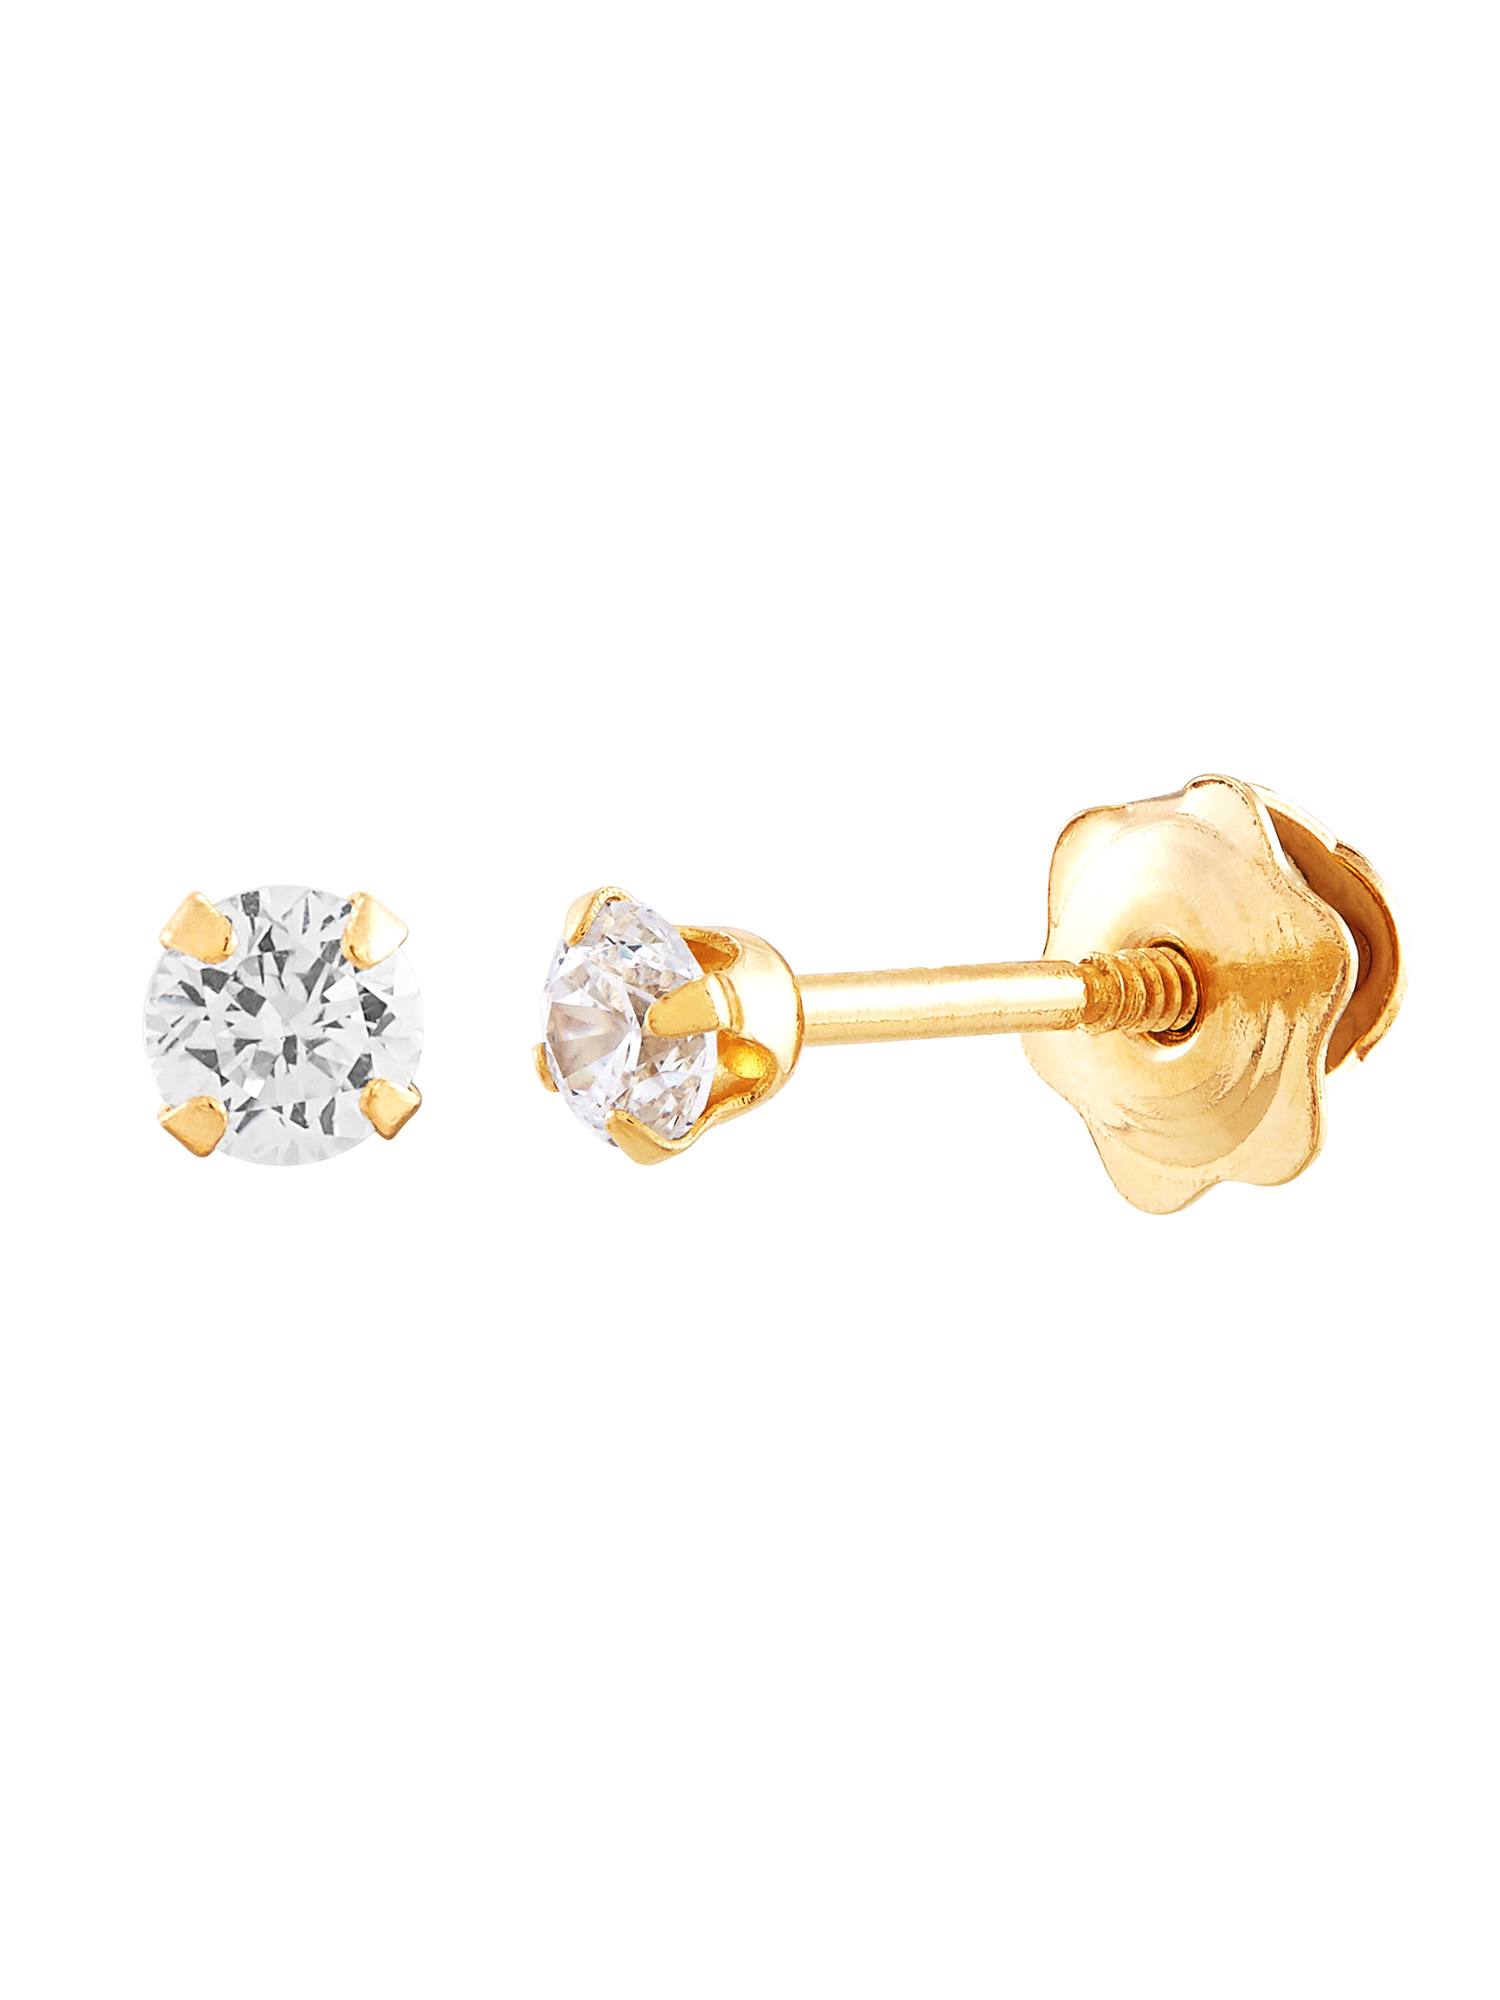 Brilliance Fine Jewelry Hoop with CZ and CZ Studs 10K Yellow Gold Set Earrings - image 3 of 8